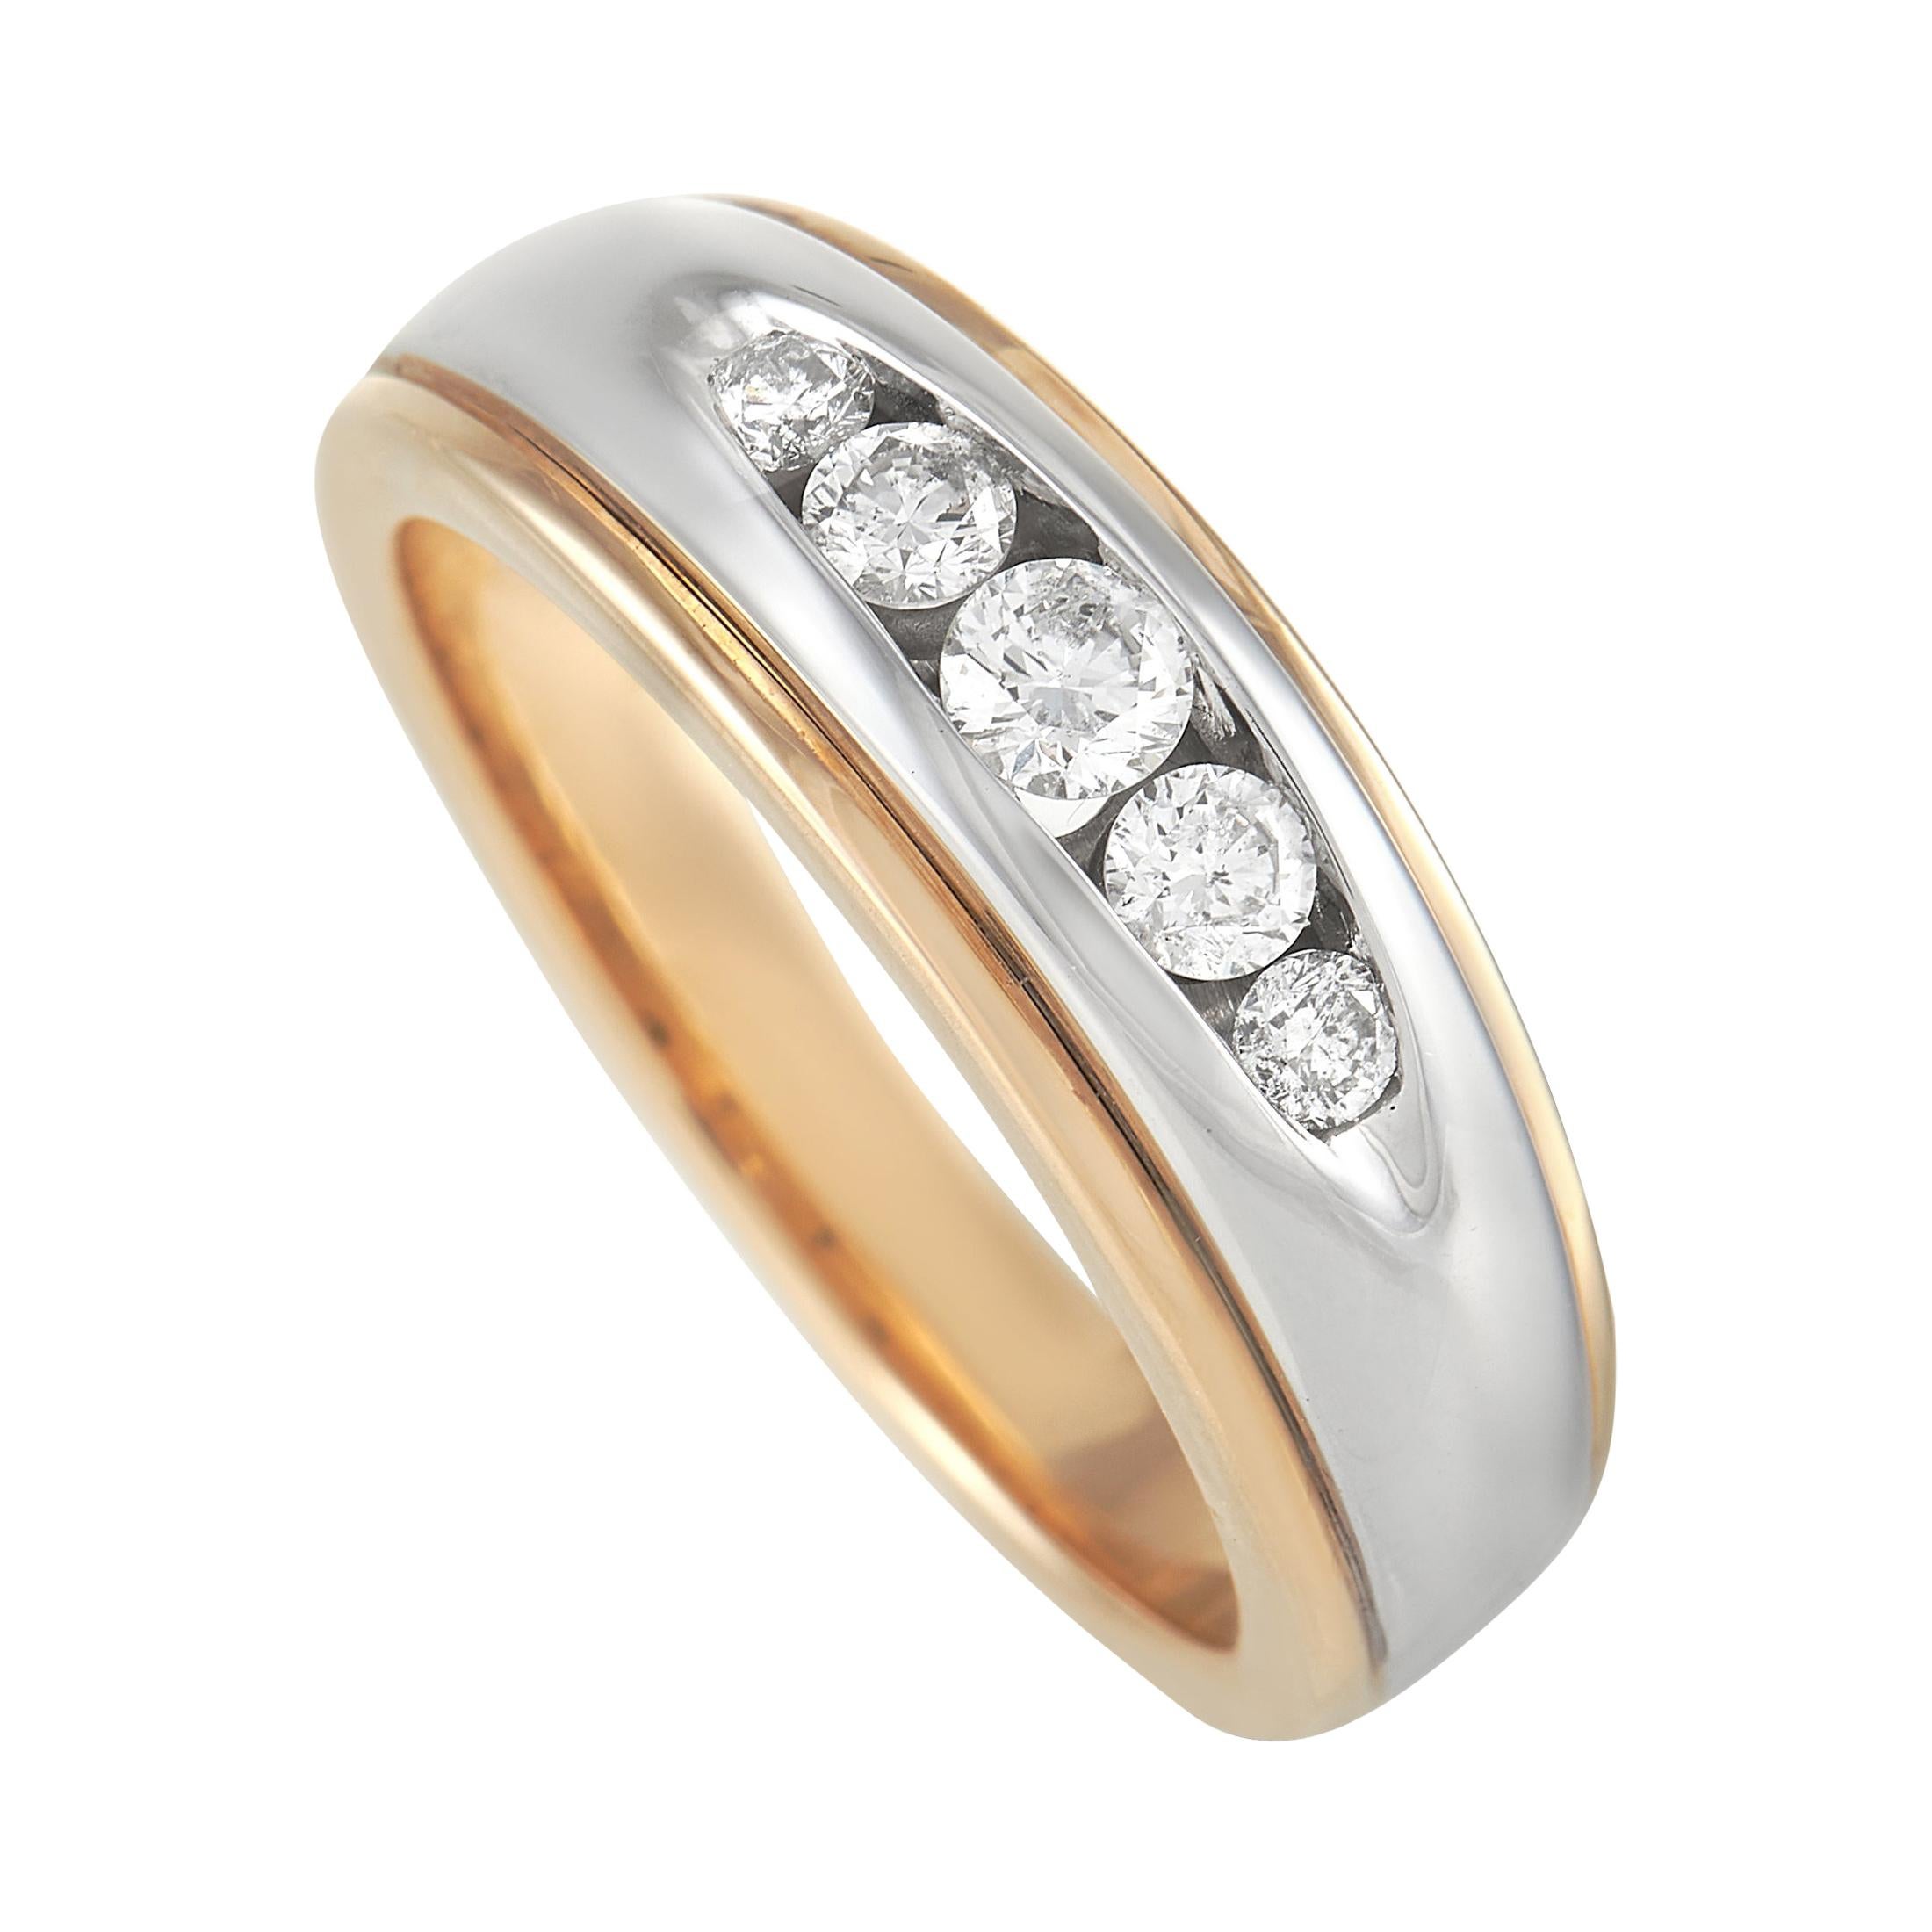 LB Exclusive 14k Yellow and White Gold 0.50 Ct Diamond Band Ring